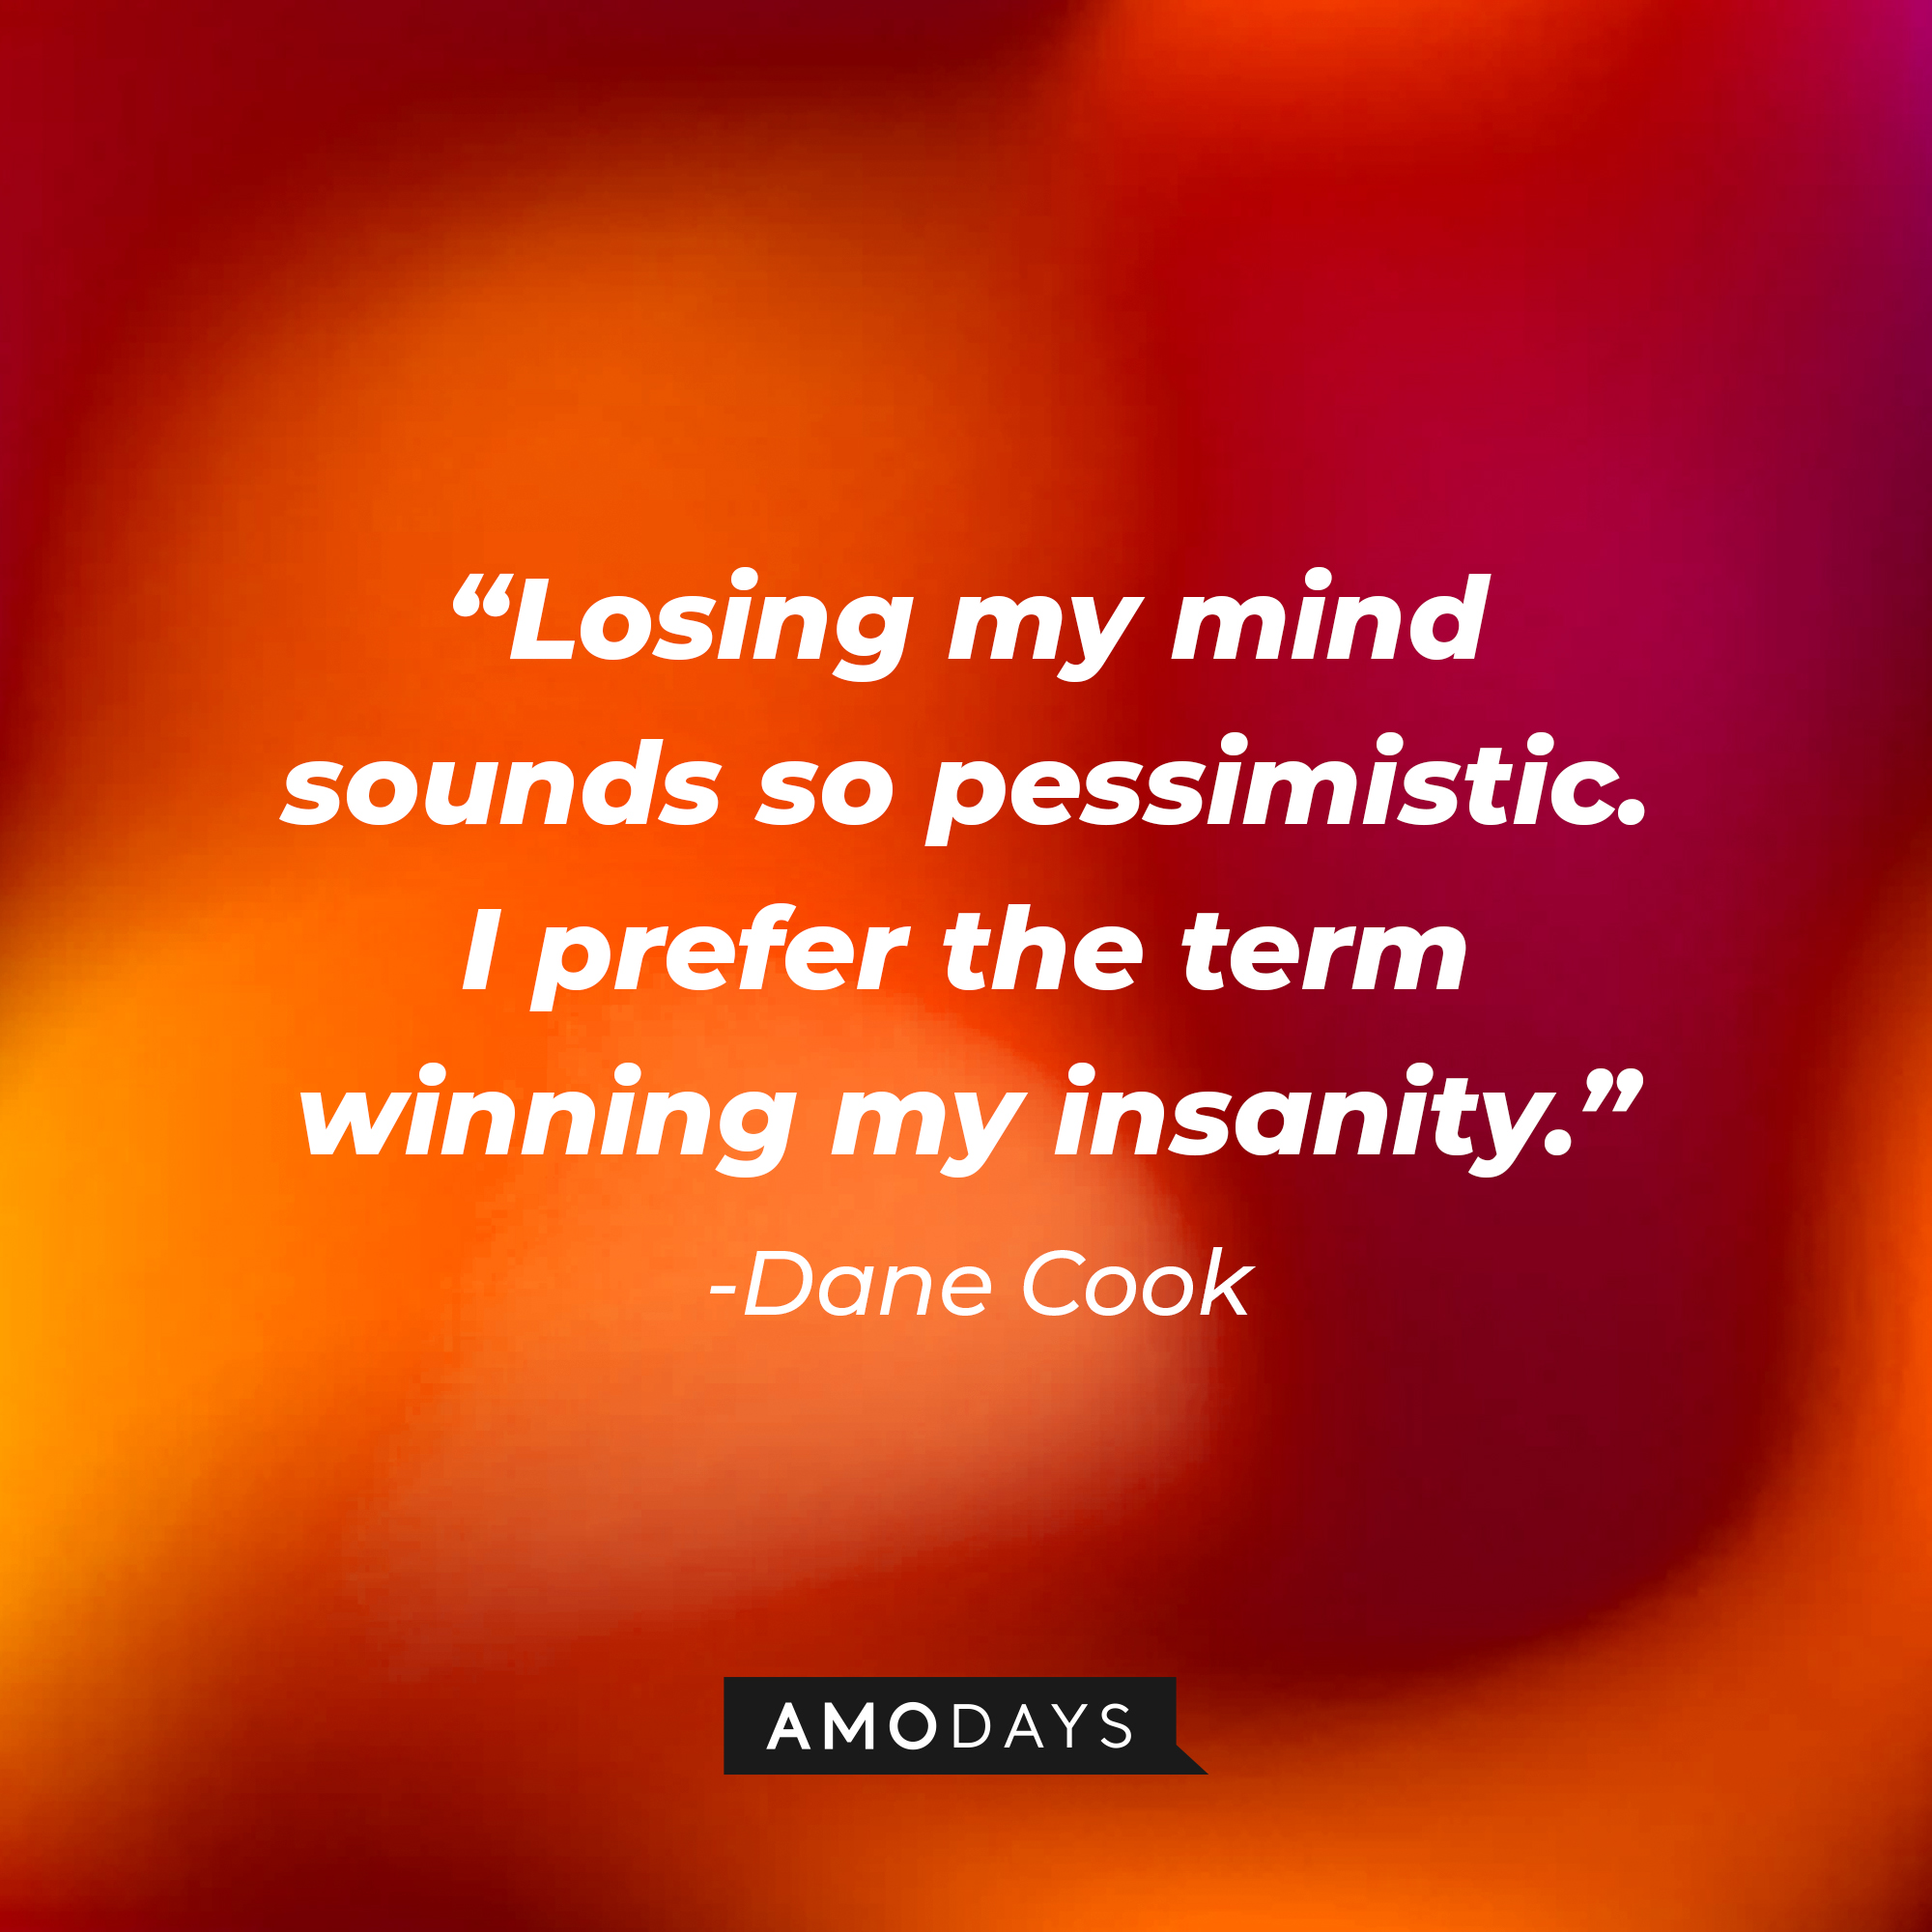 Dane Cook's quote: “Losing my mind sounds so pessimistic. I prefer the term winning my insanity.” | Source: Amodays